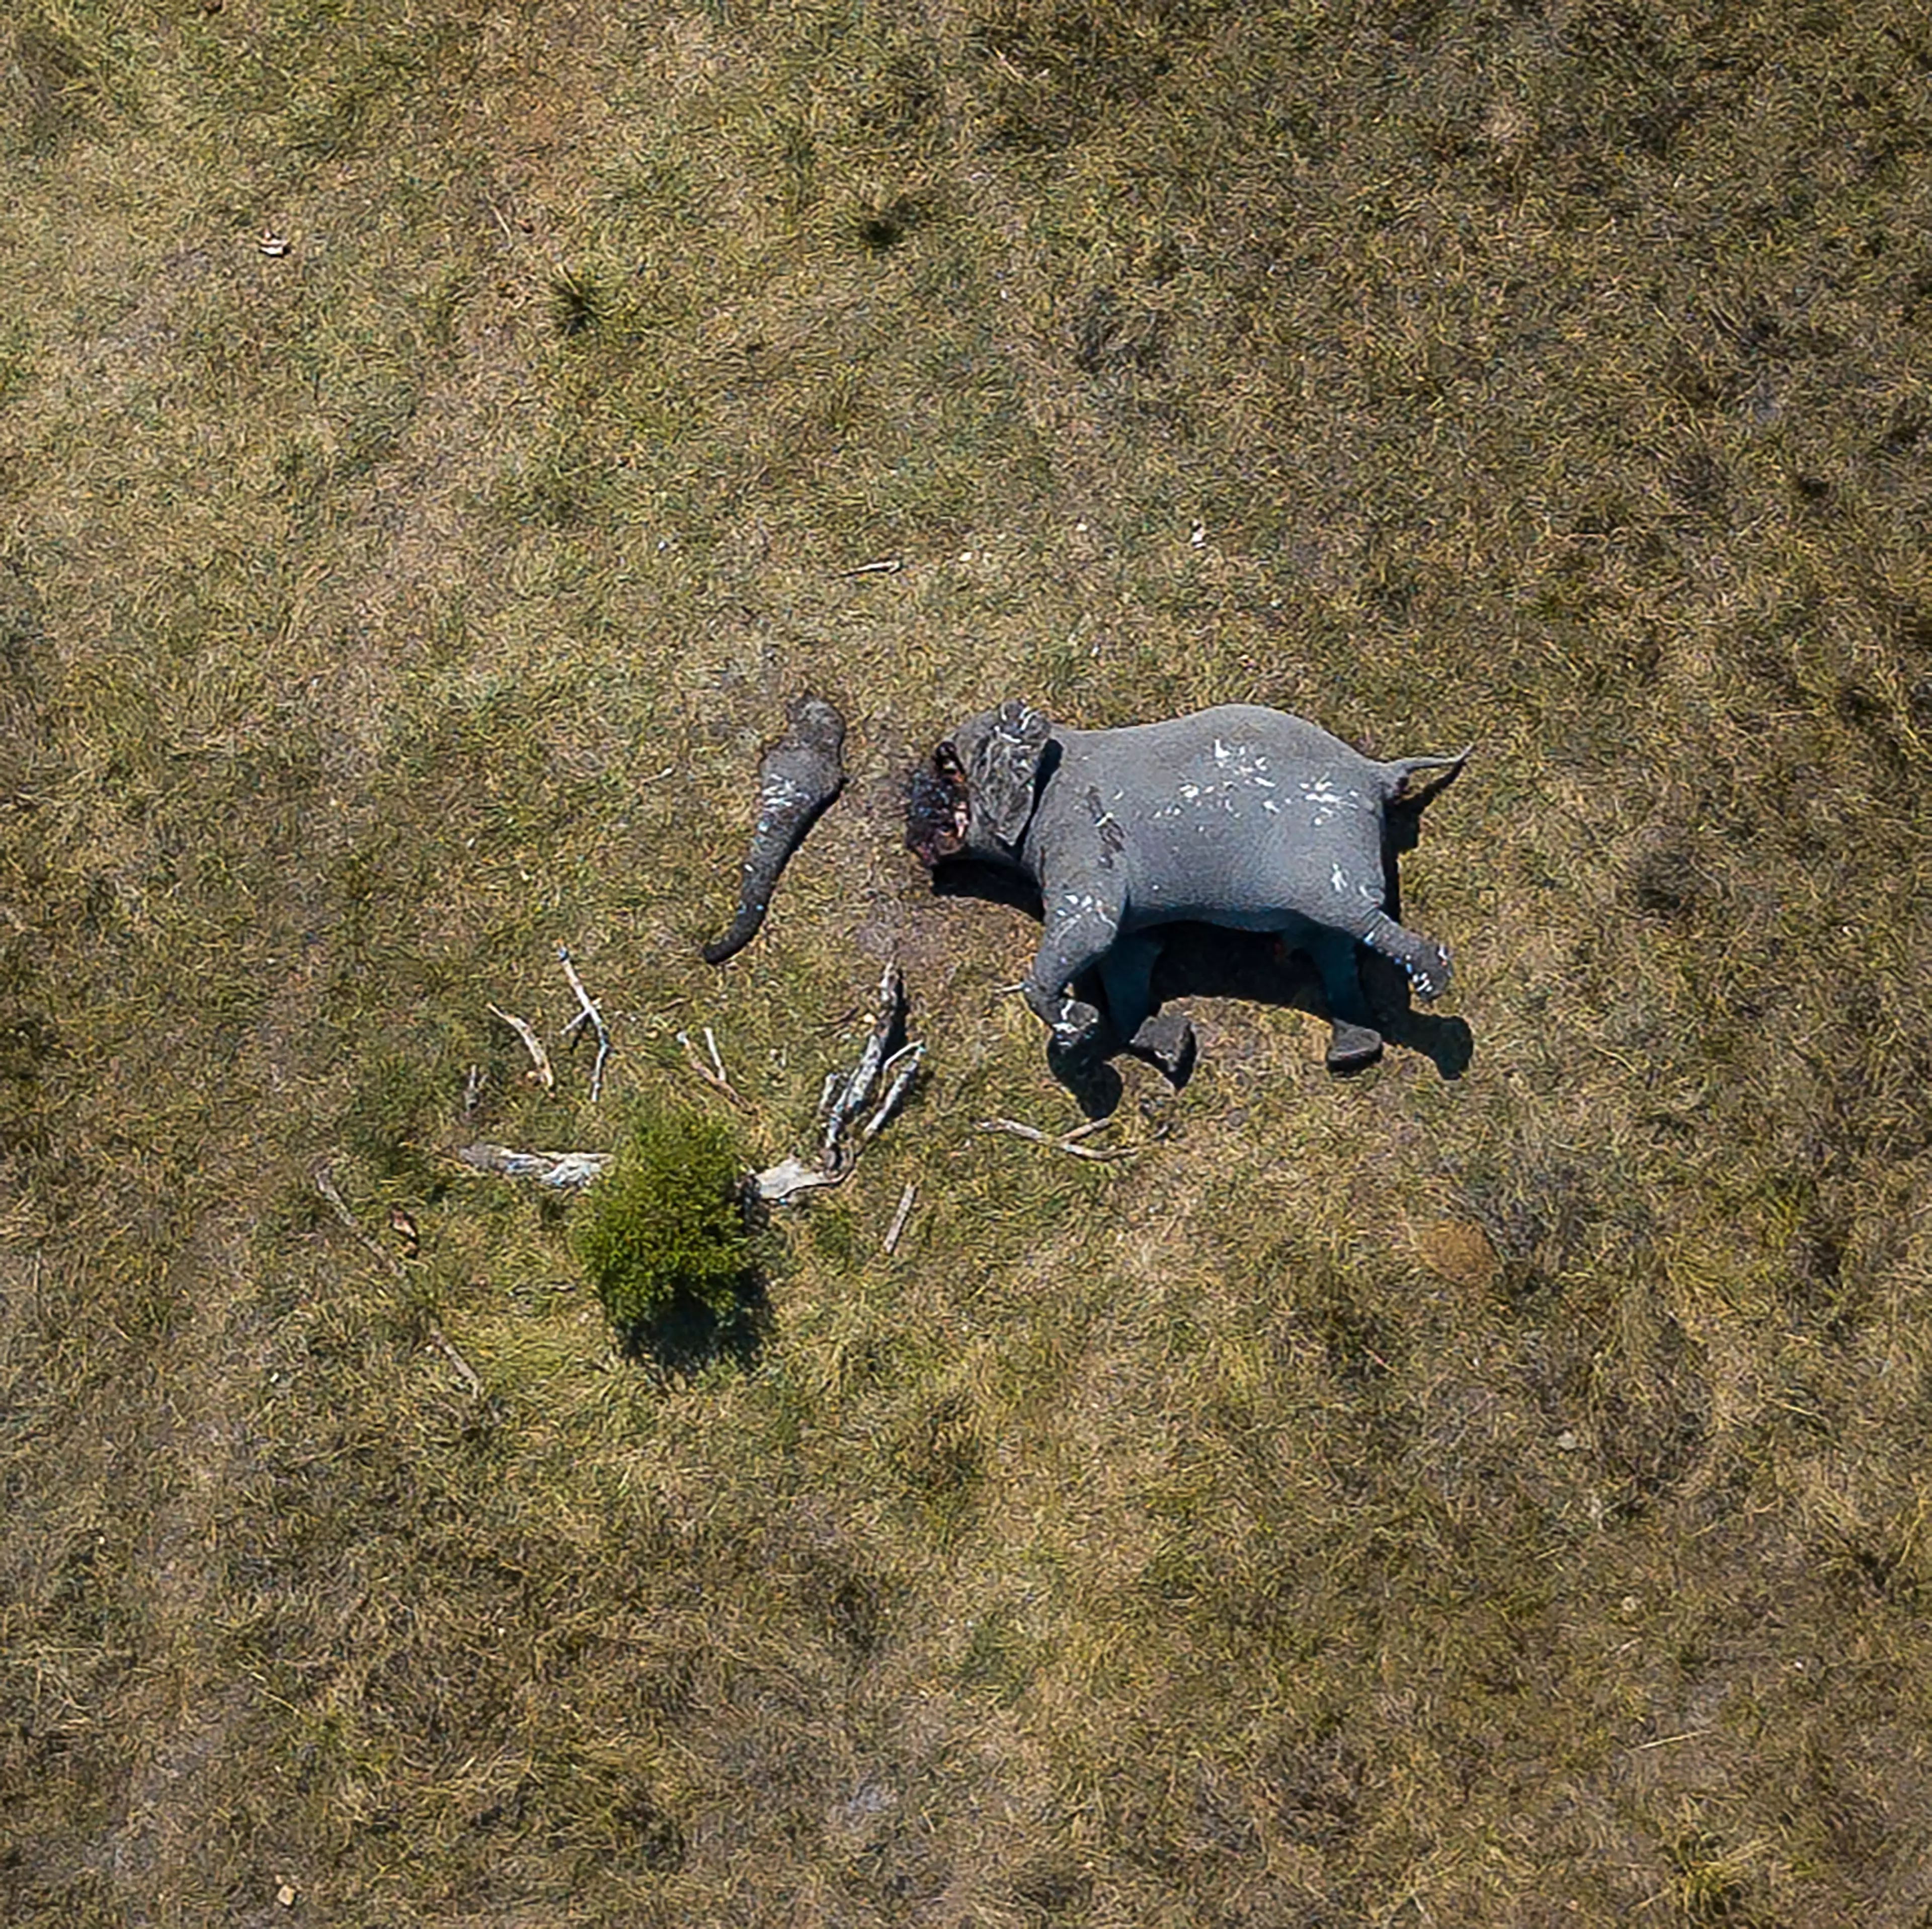 The startling photograph shows the devastation caused by poaching.